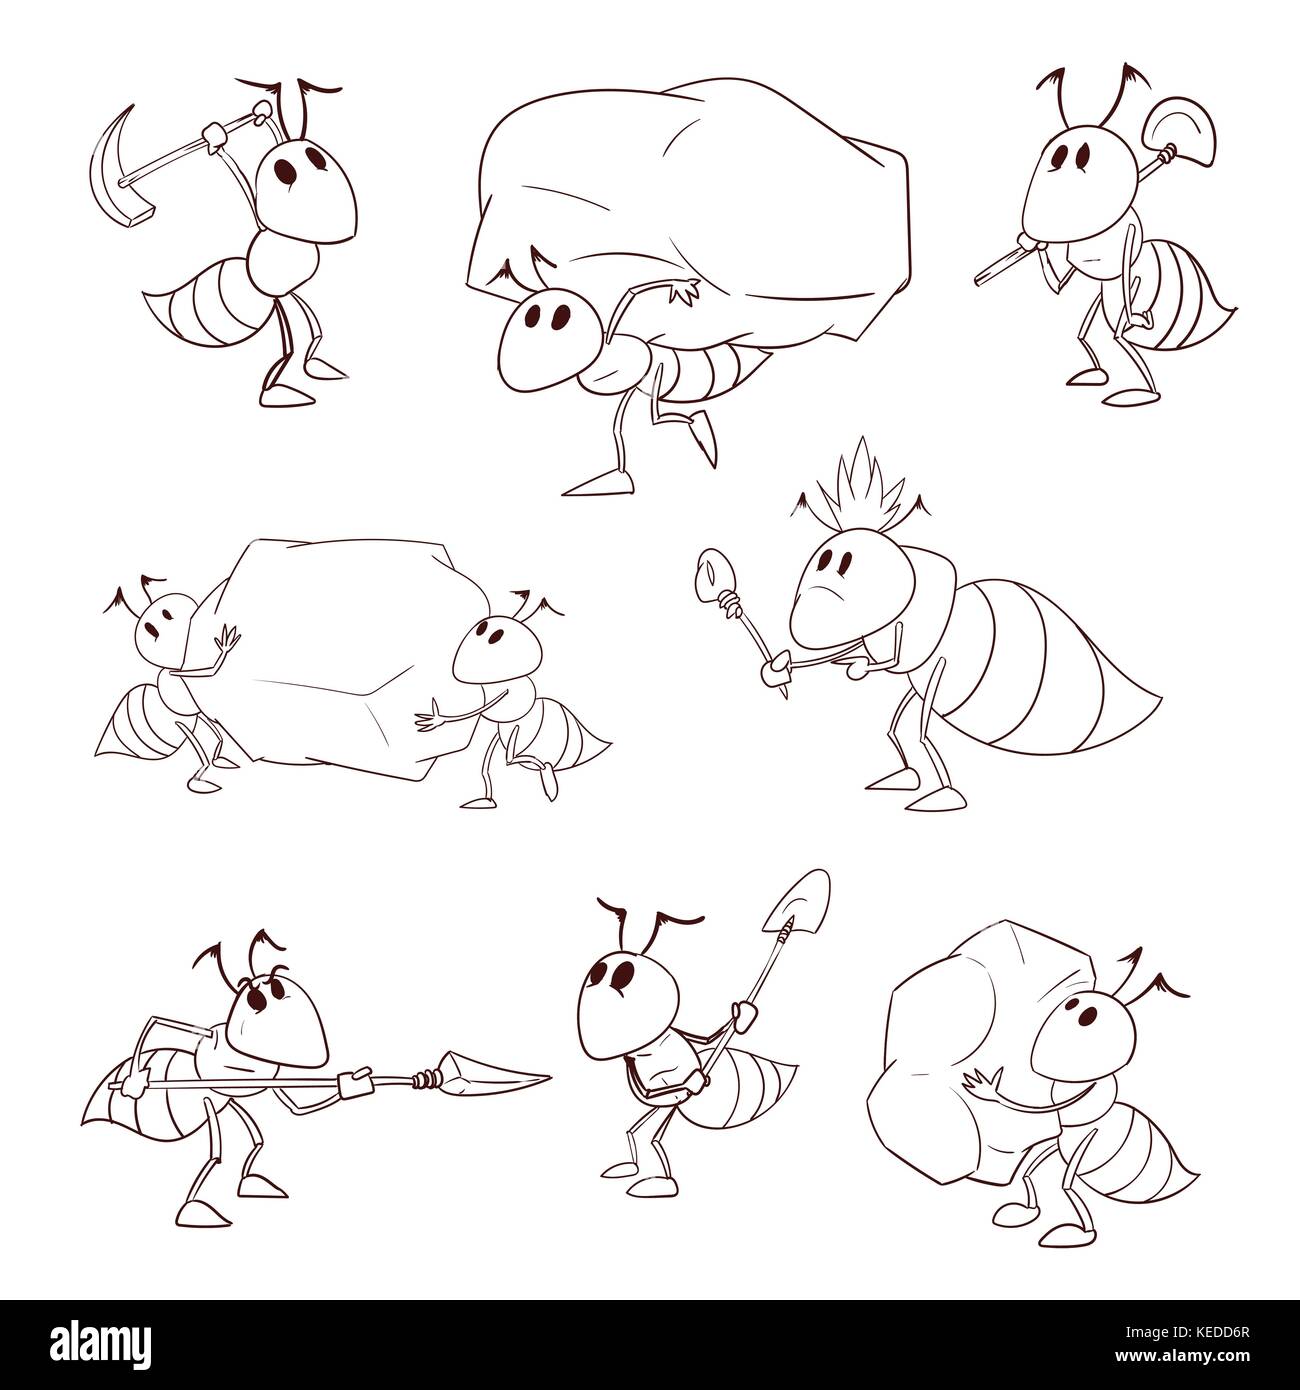 Collection of line drawing vector illustrations of cartoon ant colony Stock Vector